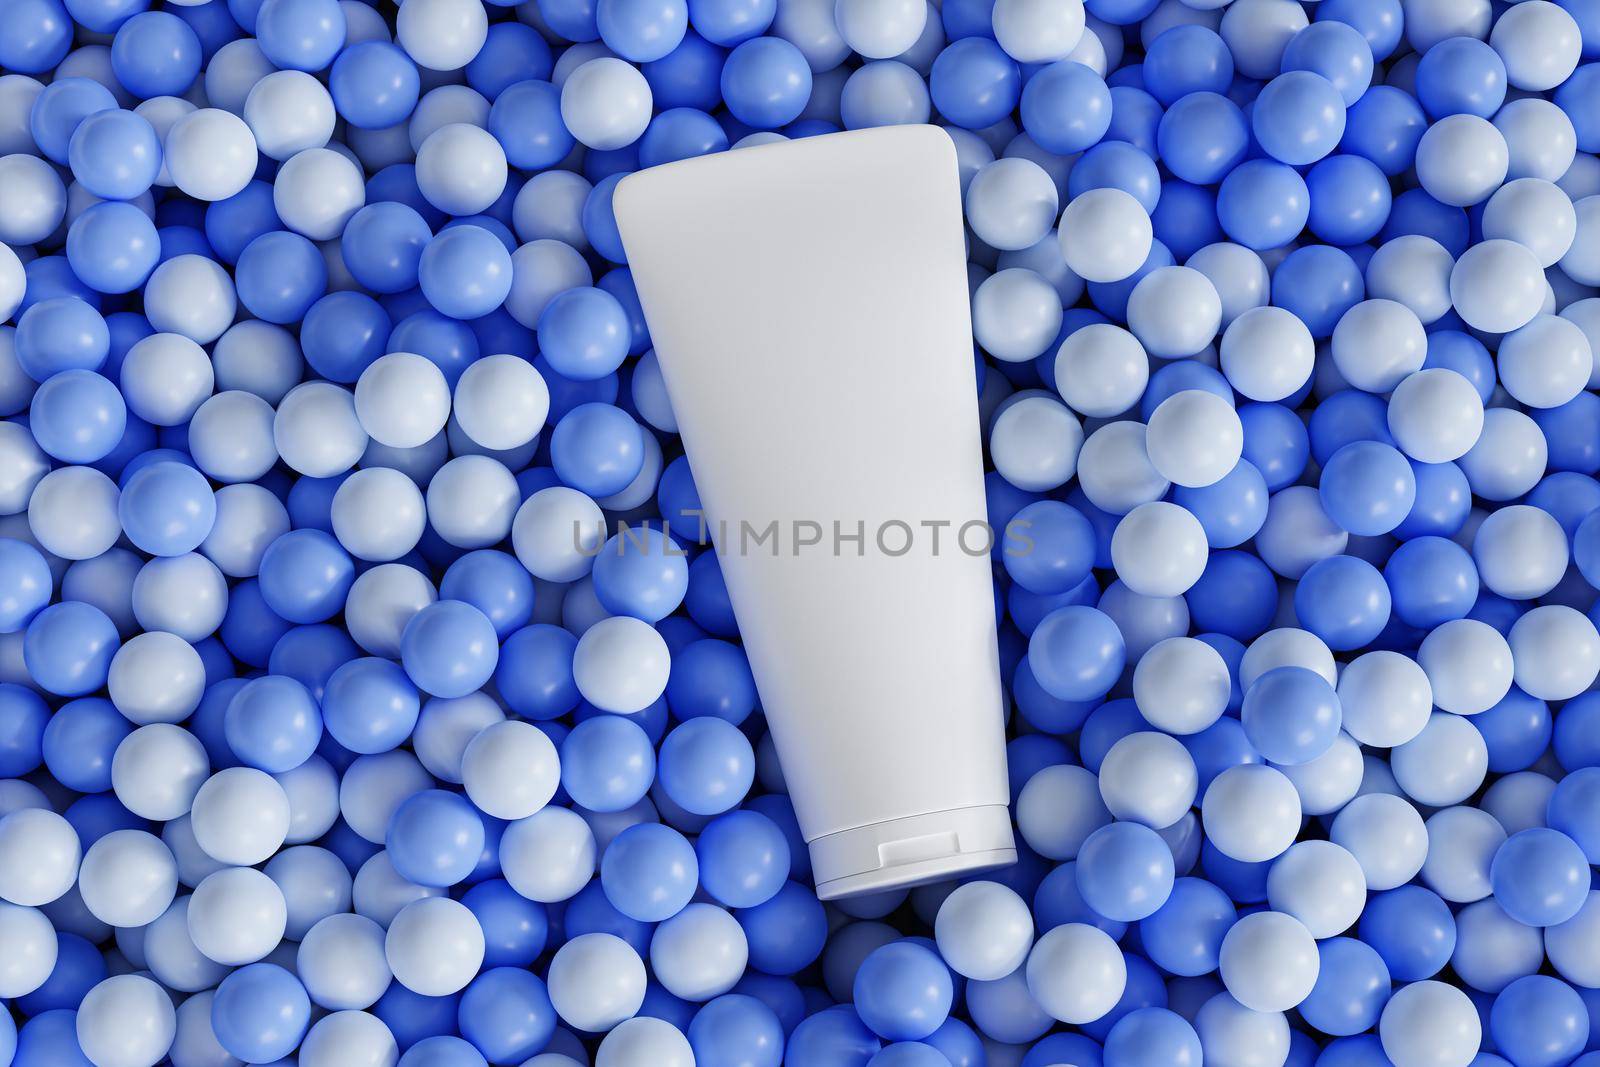 Mockup lotion tube for cosmetics products, template or advertising lies on blue balls or spheres, minimal 3d illustration render